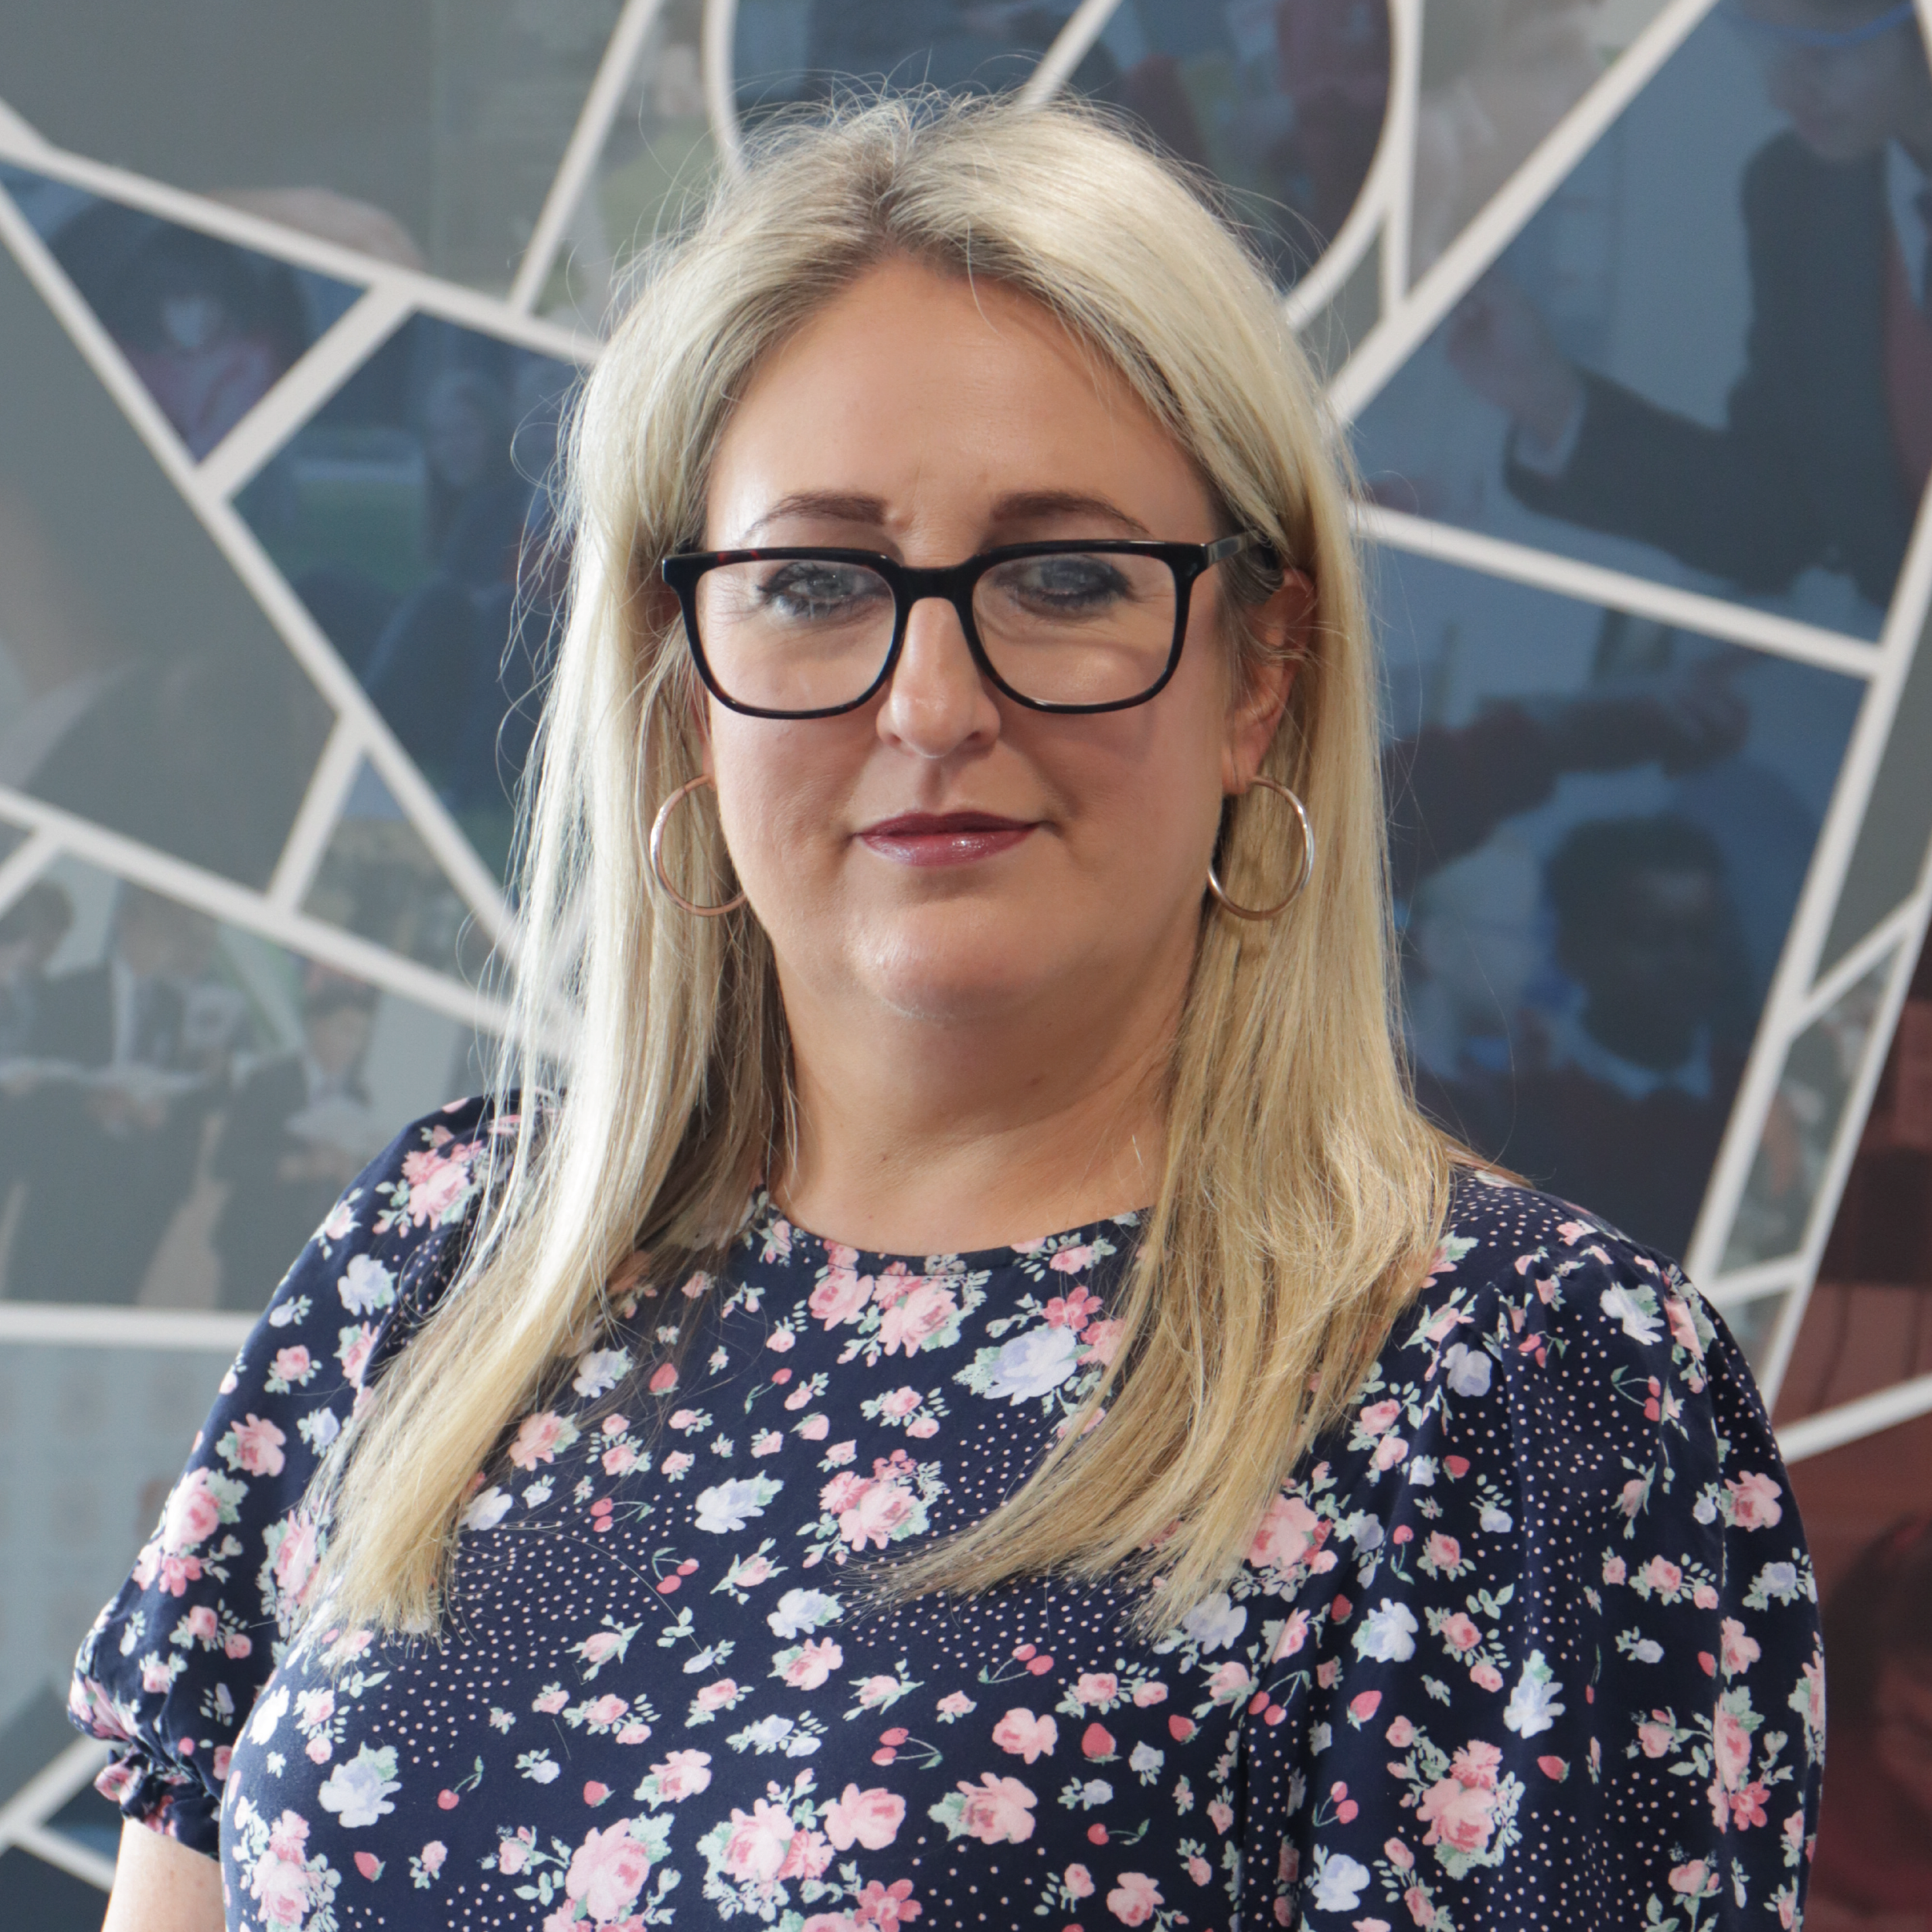 Sarah Lymer - Trustee
Date of appointment - 17 October 2019
Term of office - 4 years
Appointed/reappointed by academy members